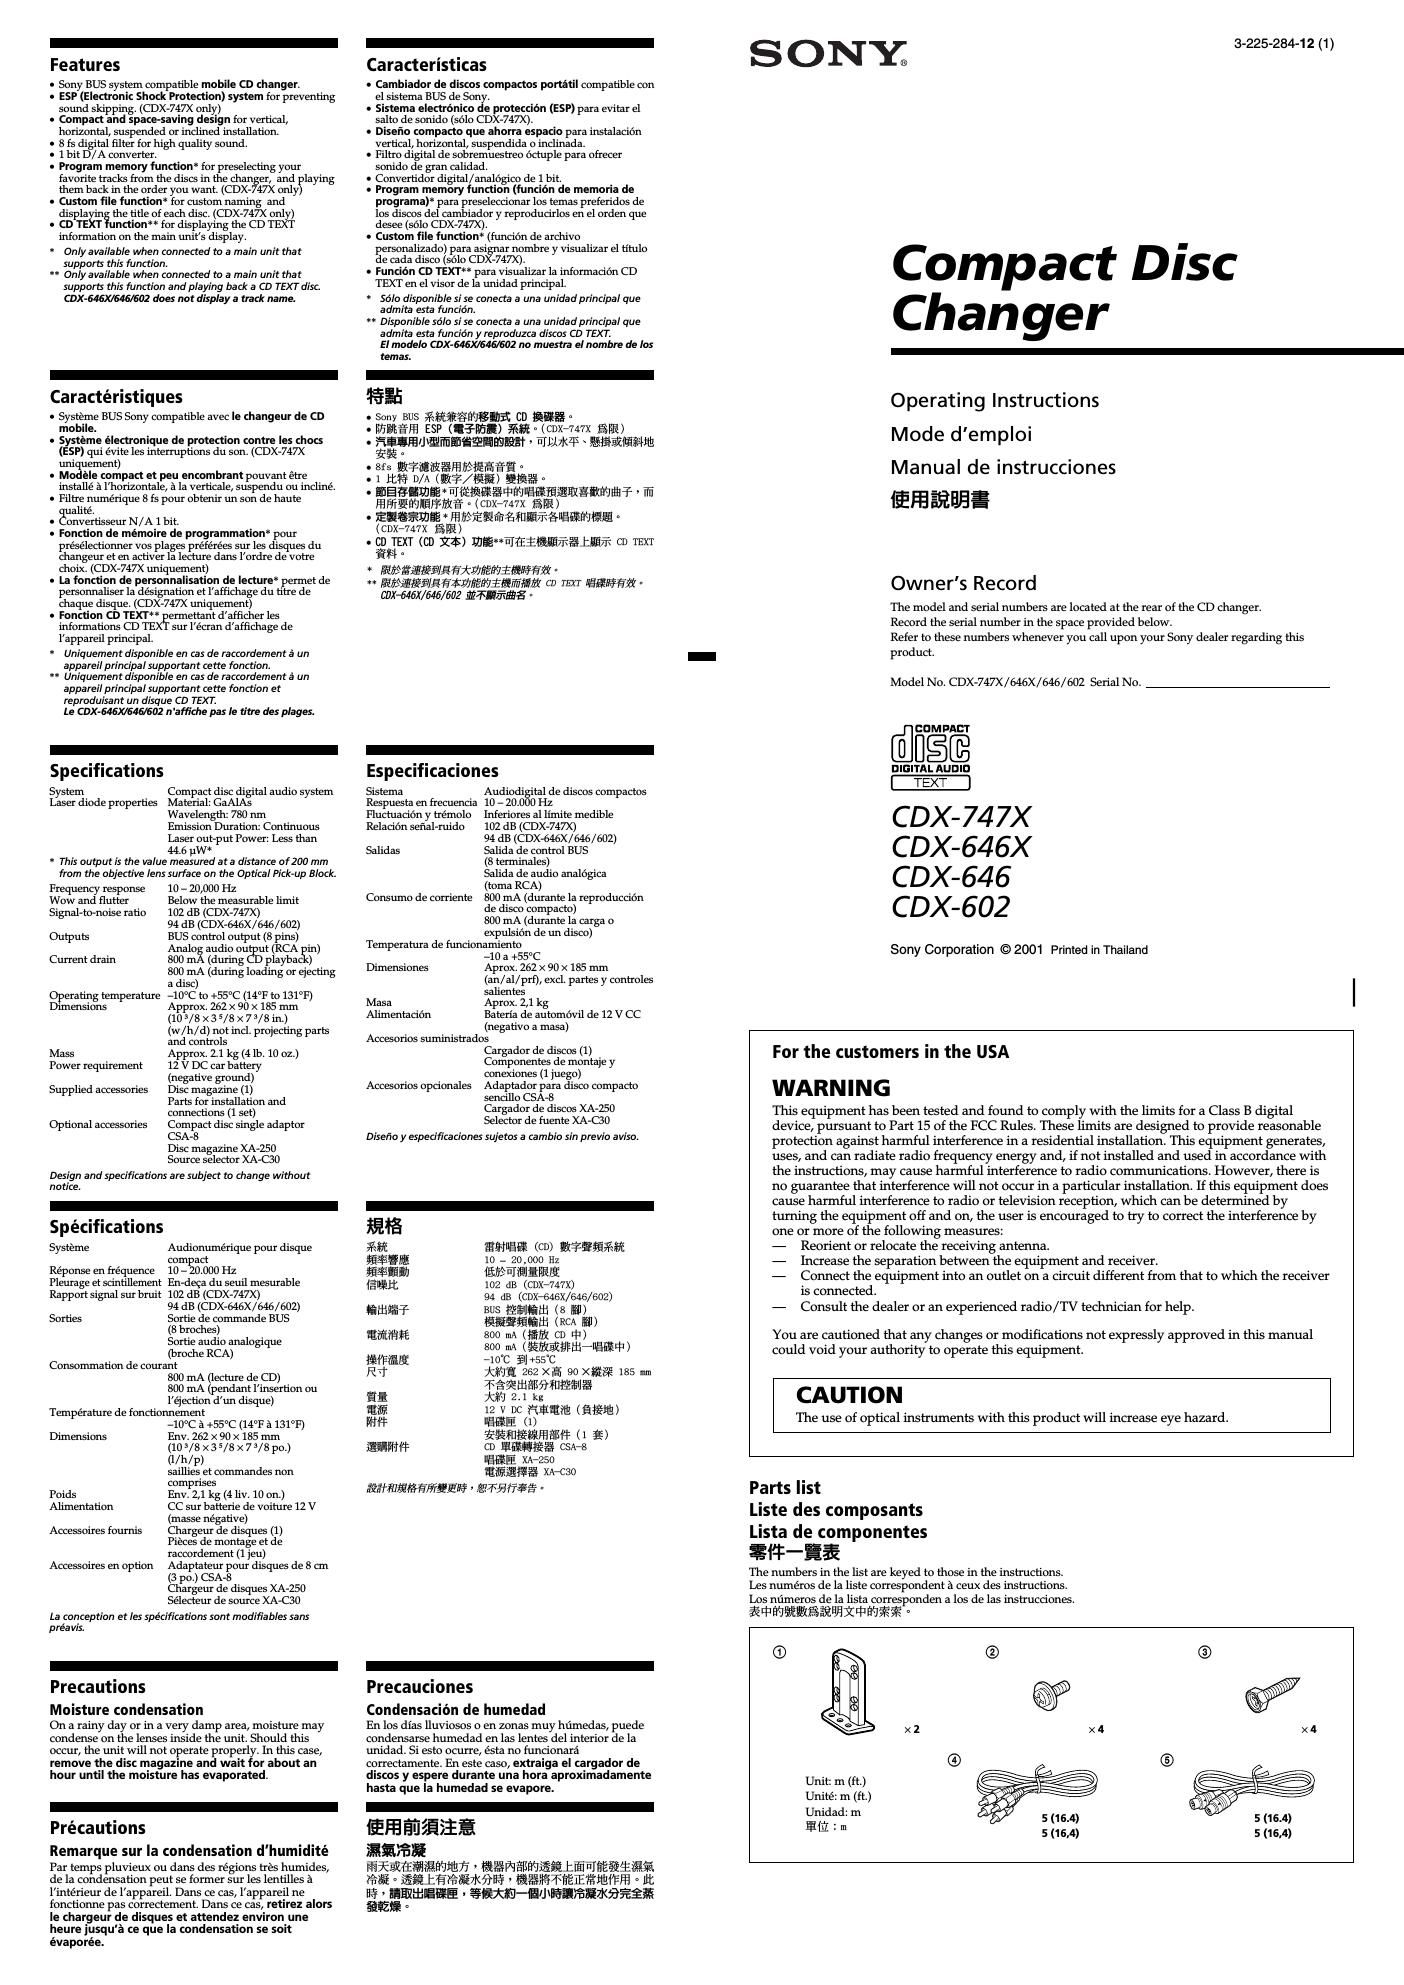 sony cdx 602 owners manual